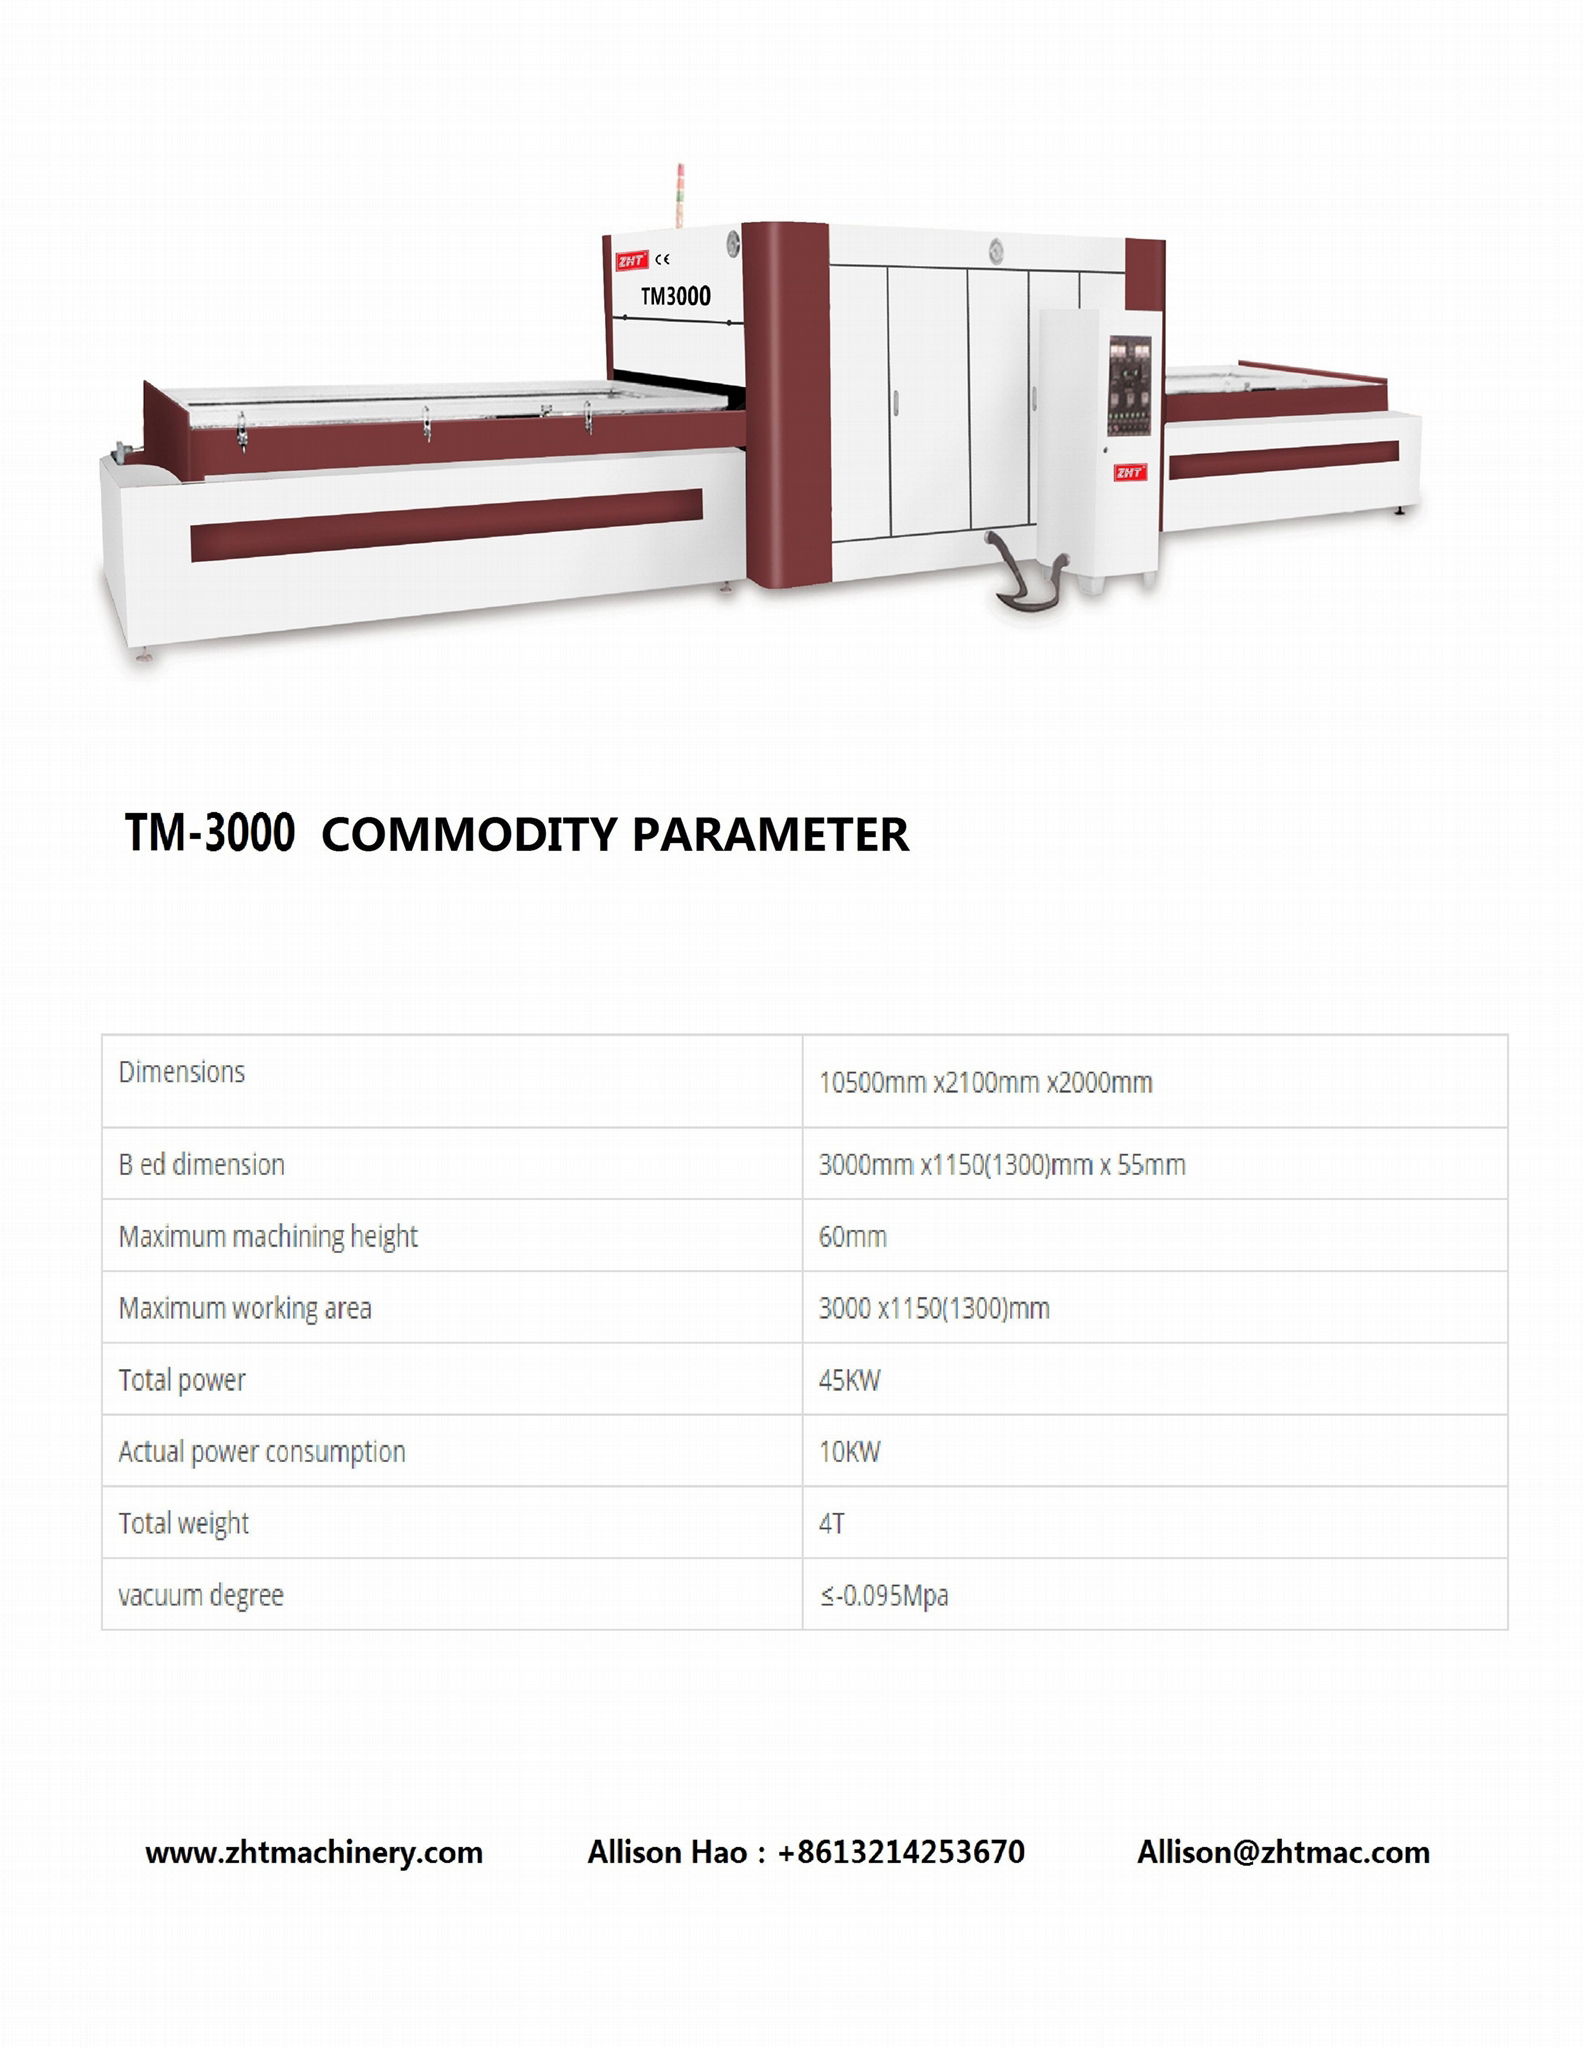 Manufacturer of standard and custom hydraulic laminating presses ZHT MACHINERY 2